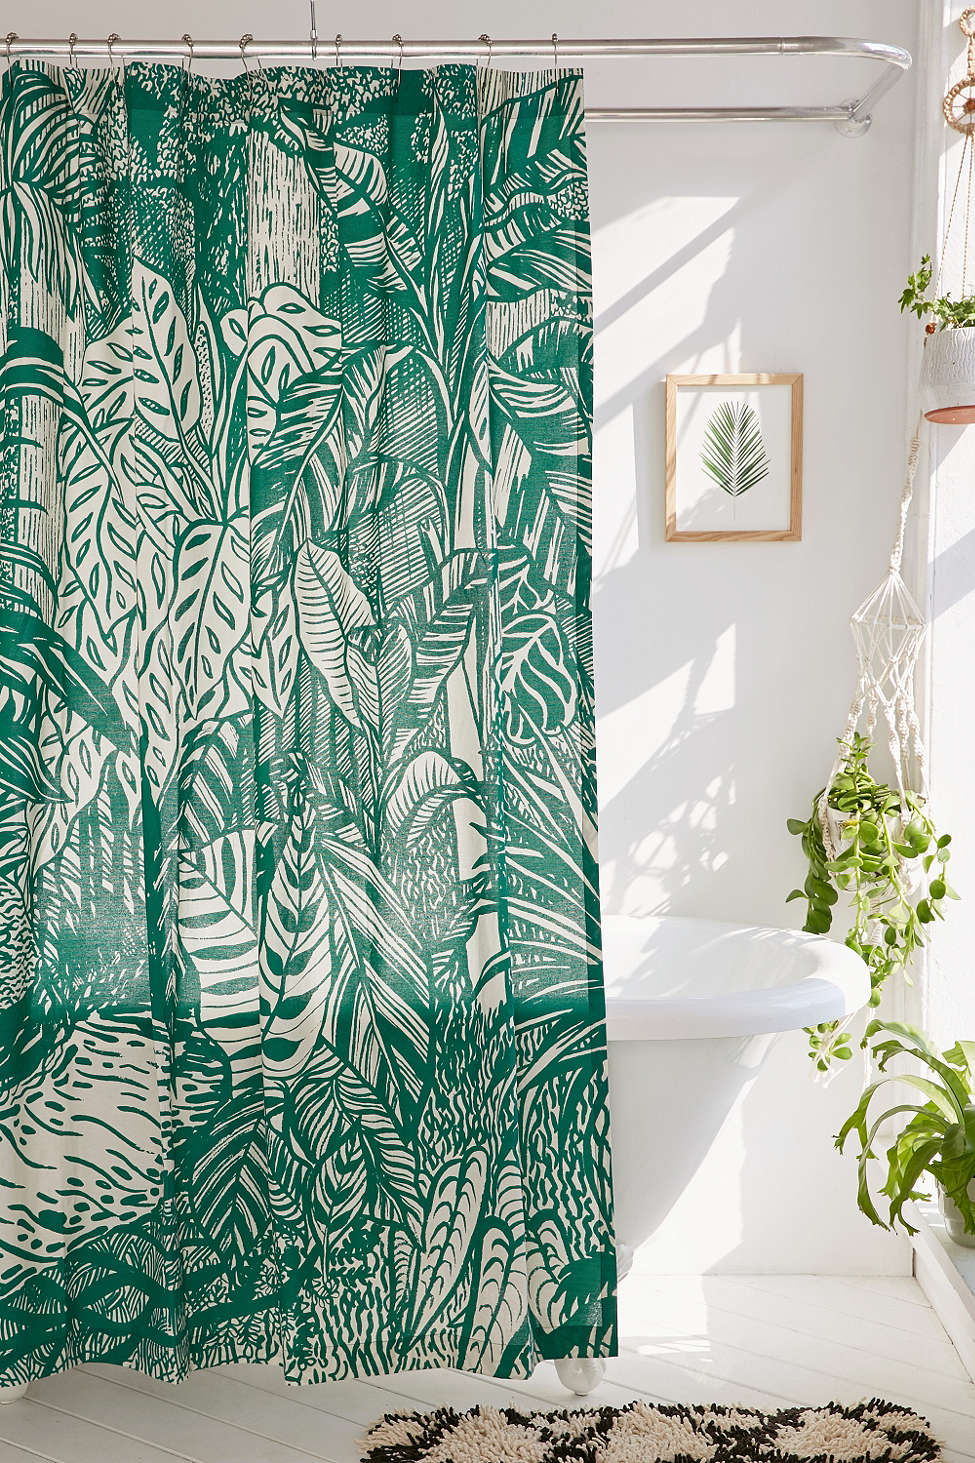 Pomeroy Plants Shower Curtain | Pretty shower curtains and more home decor ideas from @cydconverse